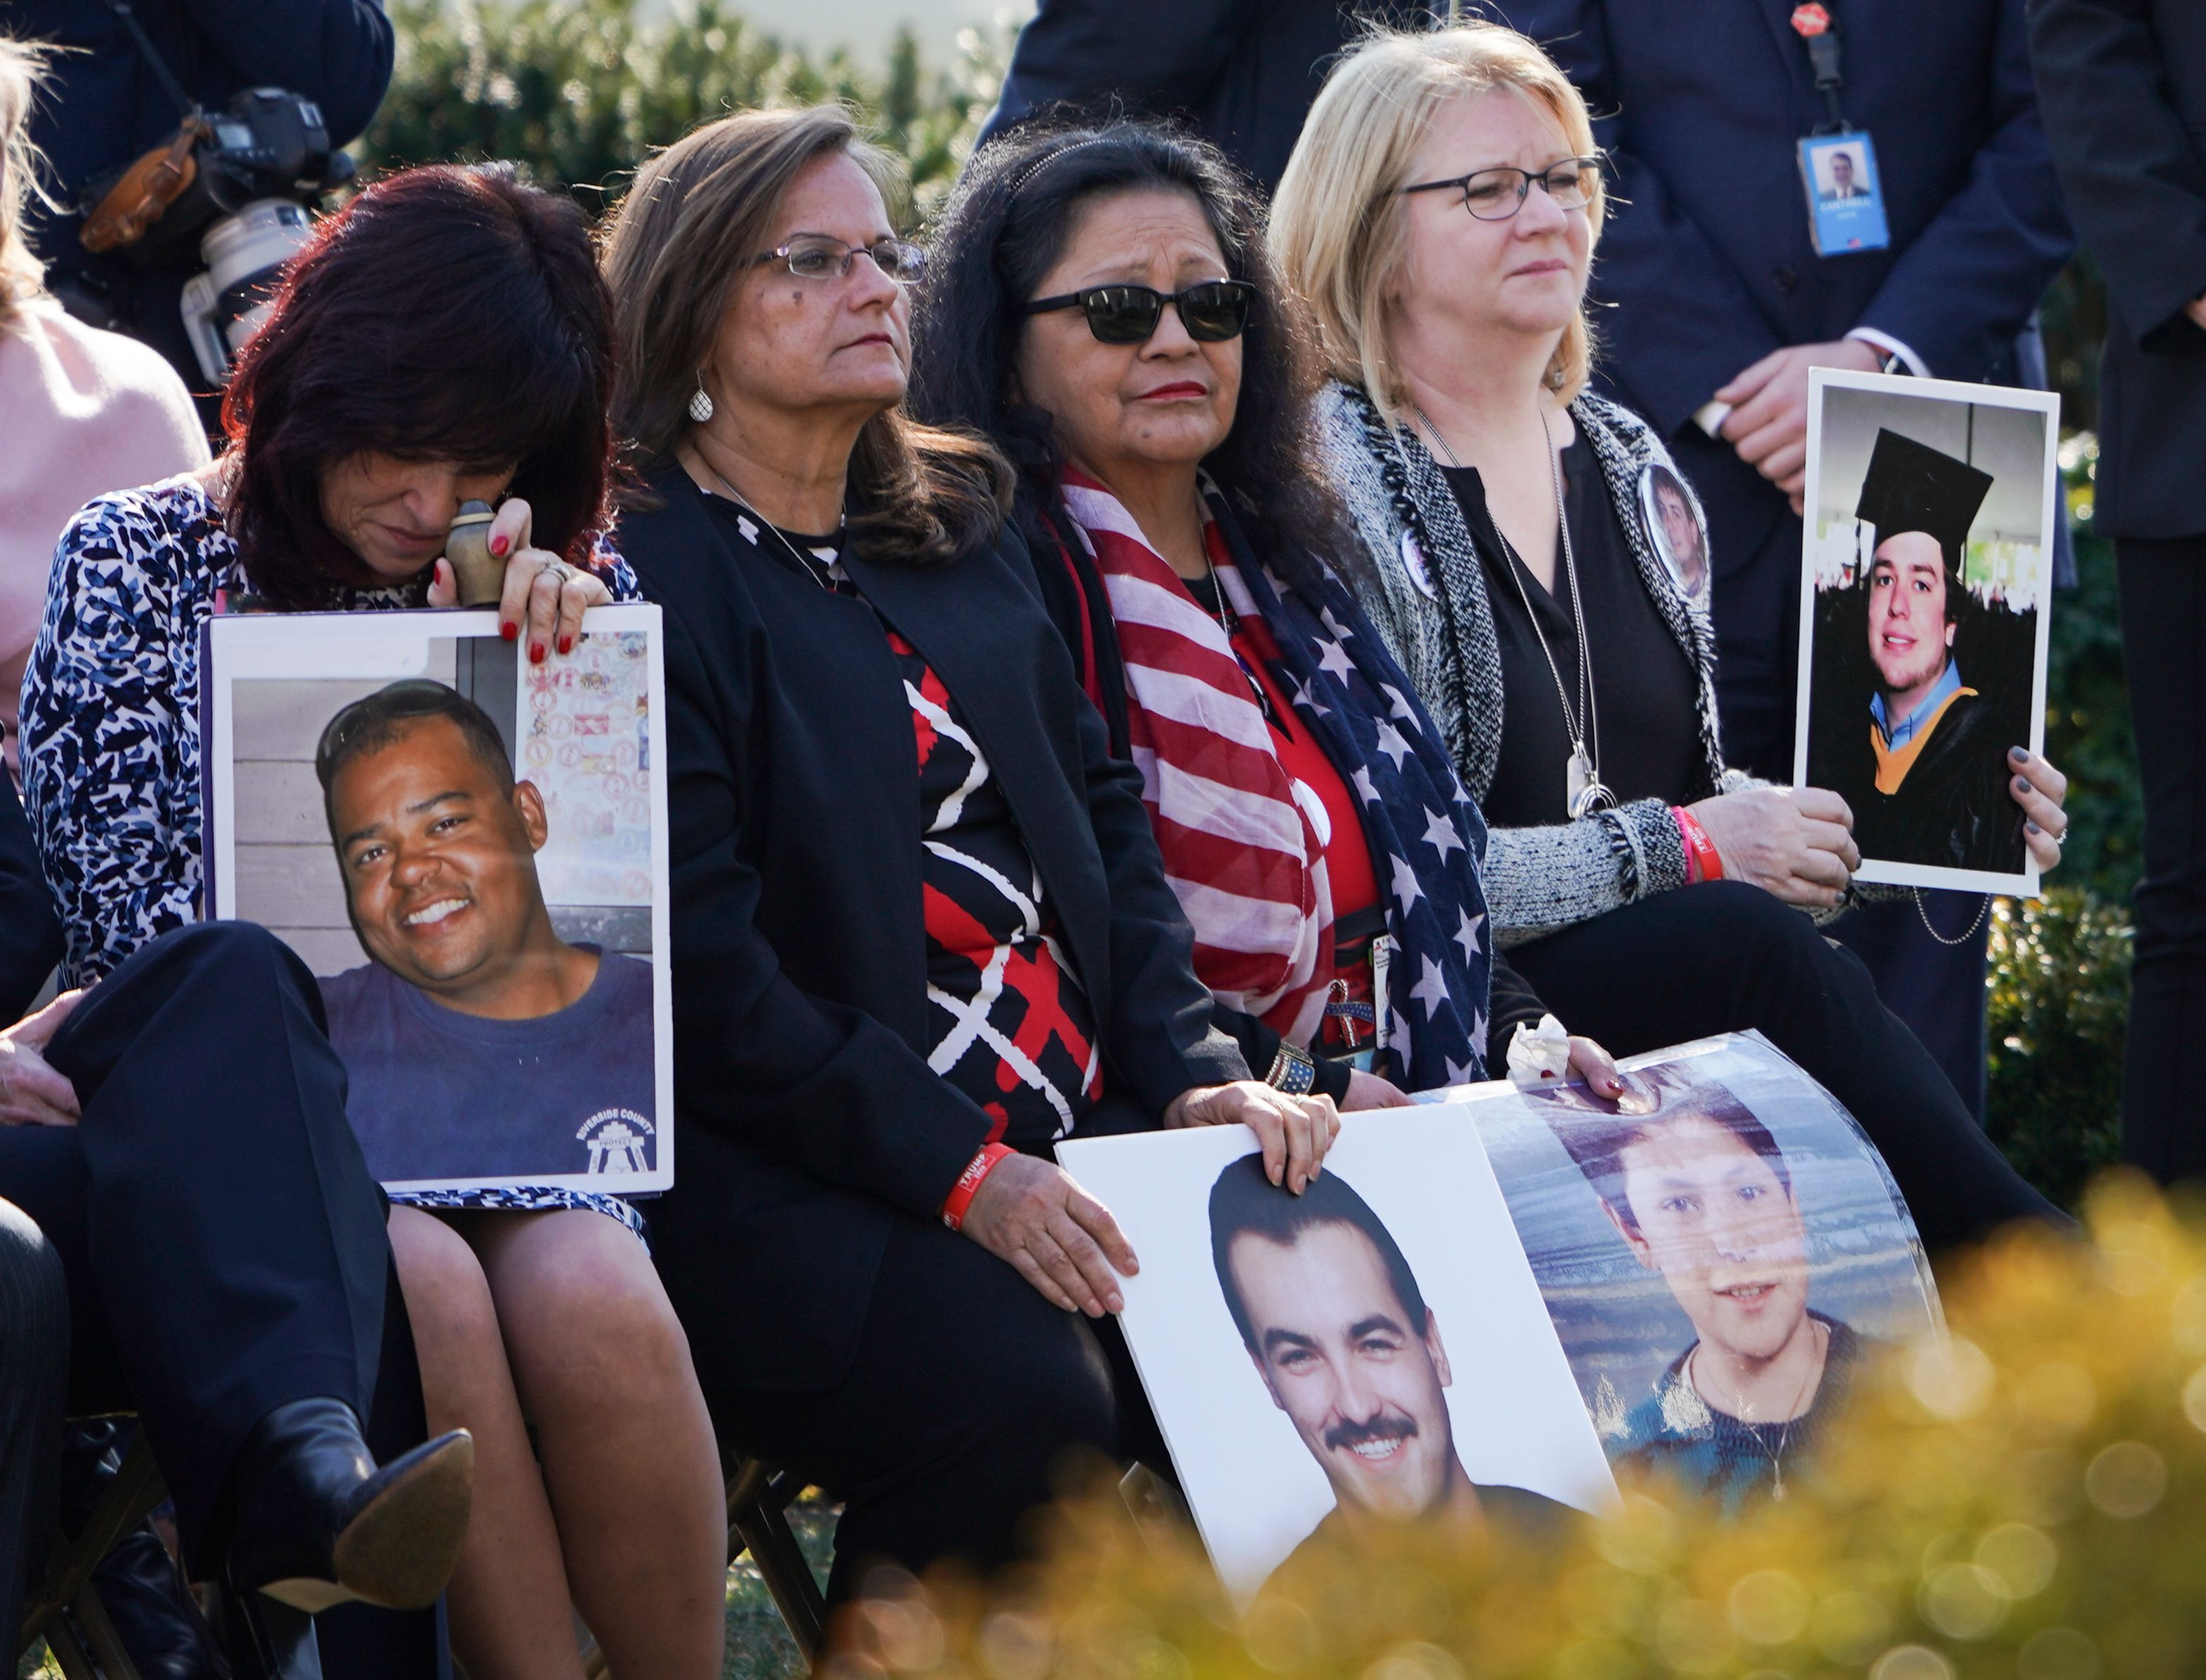 Family members hold portraits of loved one that were victims of crimes committed by undocumented immigrants, as US President Donald Trump delivers remarks, in the Rose Garden at the White House in Washington, DC on February 15, 2019. (Photo by BRENDAN SMIALOWSKI/AFP/Getty Images)